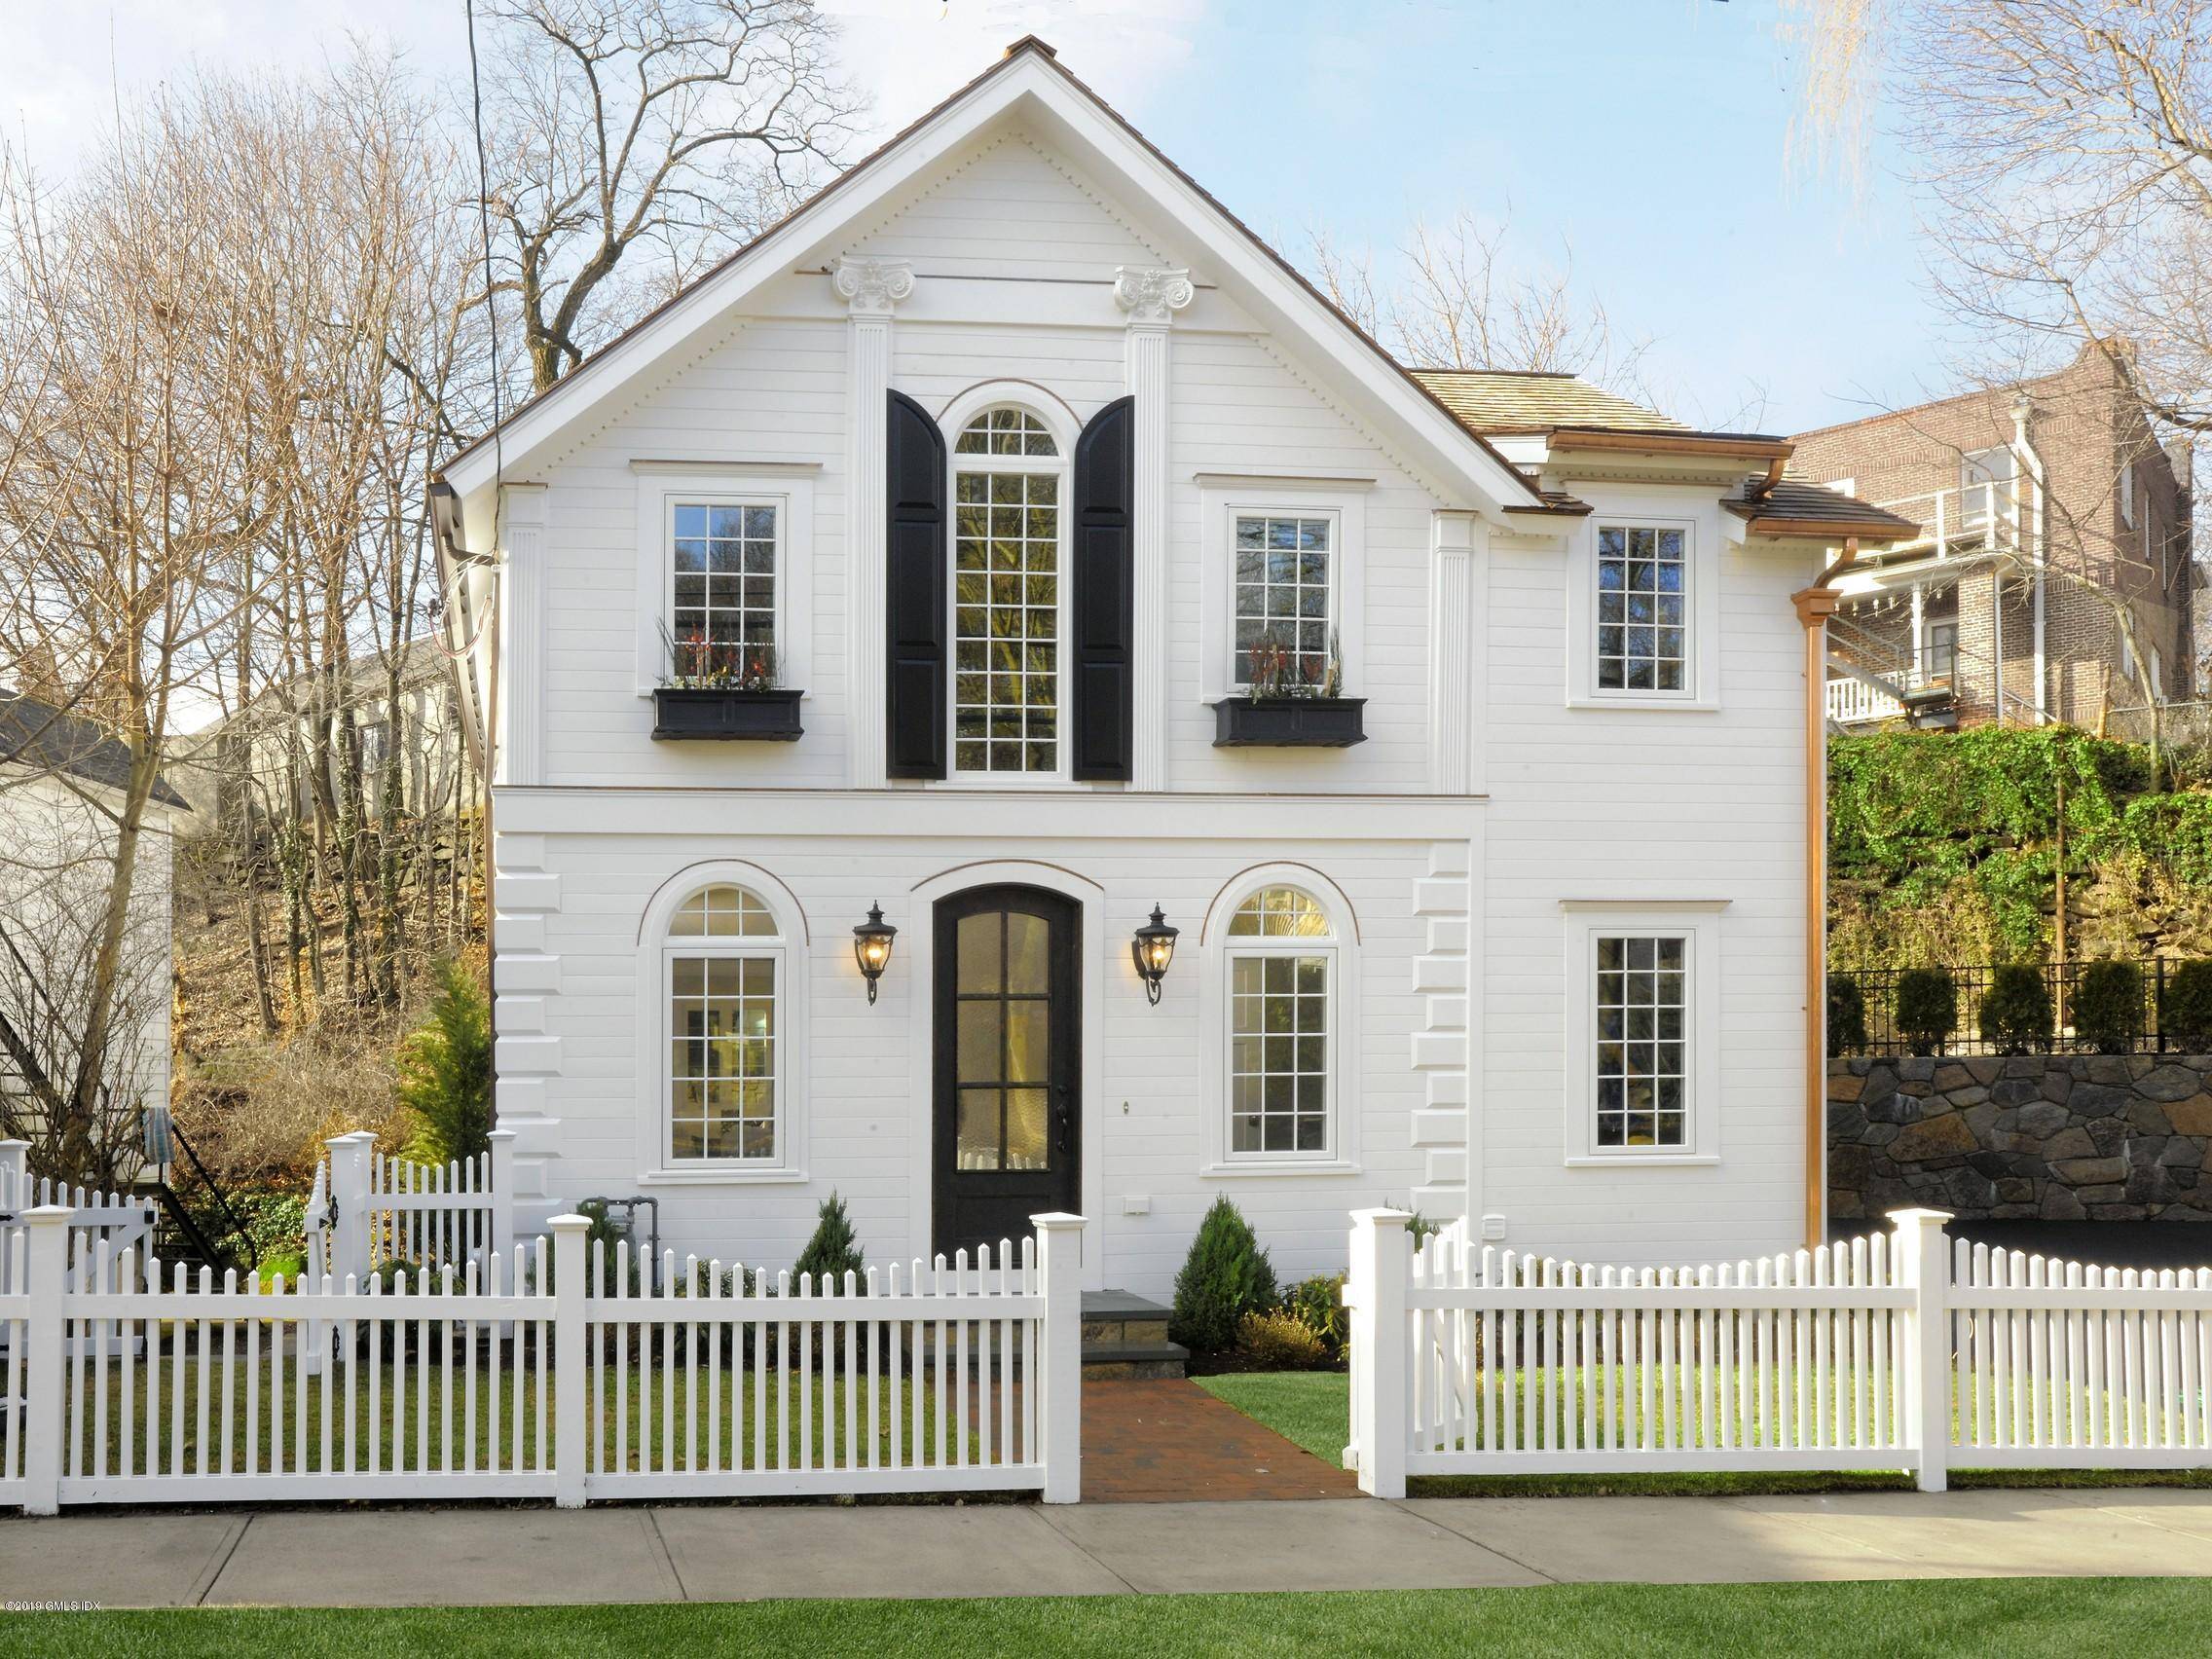 THIS SOUTHERN COLONIAL STYLE GEM IS LOCATED IN THE HEART OF DOWN TOWN GREENWICH AND IS JUST A SIDEWALK AWAY FROM EVERYTHING THAT IN TOWN LIVING HAS TO OFFER.